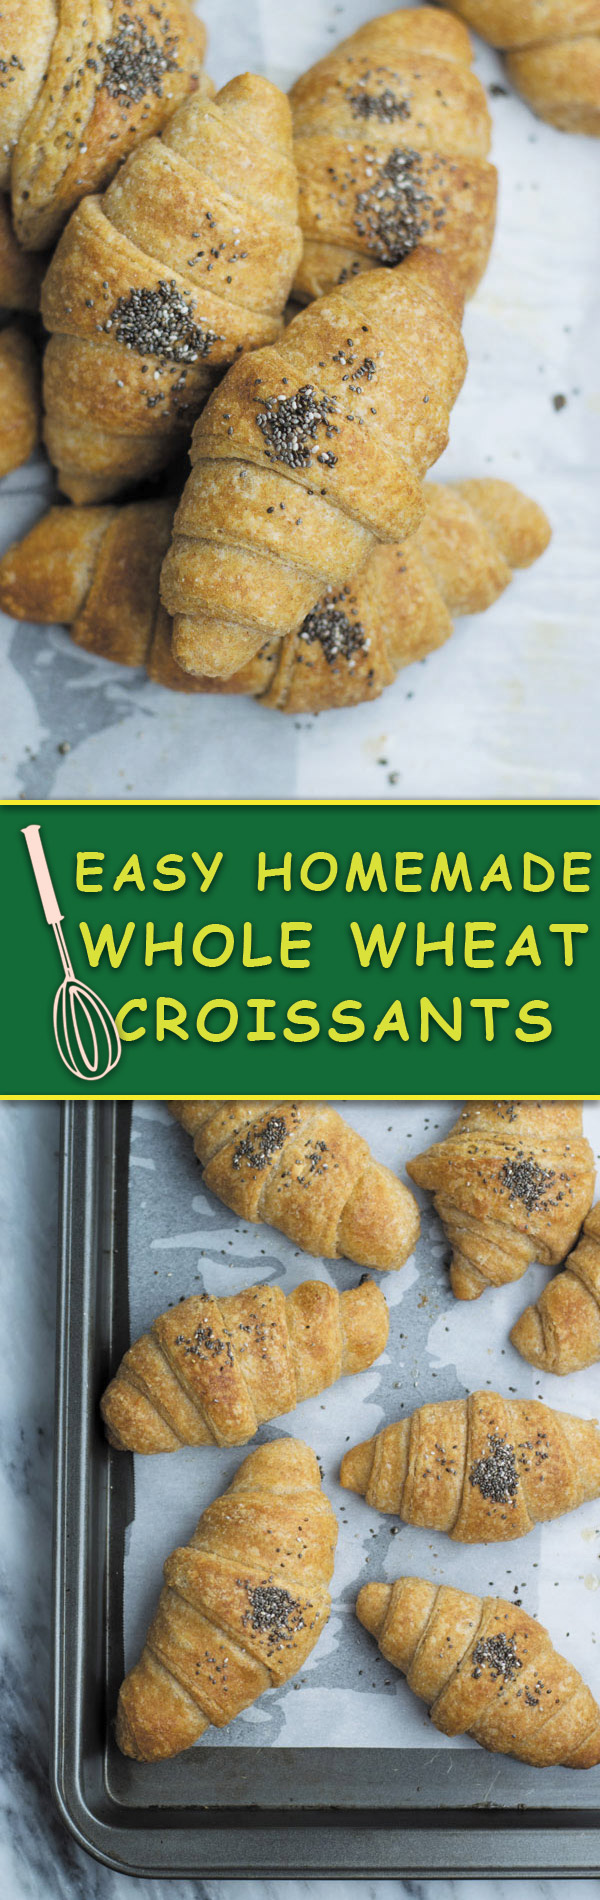 Easy Homemade Whole Wheat Croissants - a little healthier verion of regular croissants. These CROISSANTS are buttery, melts in mouth and so good that you will NEVER go bake to buying again!